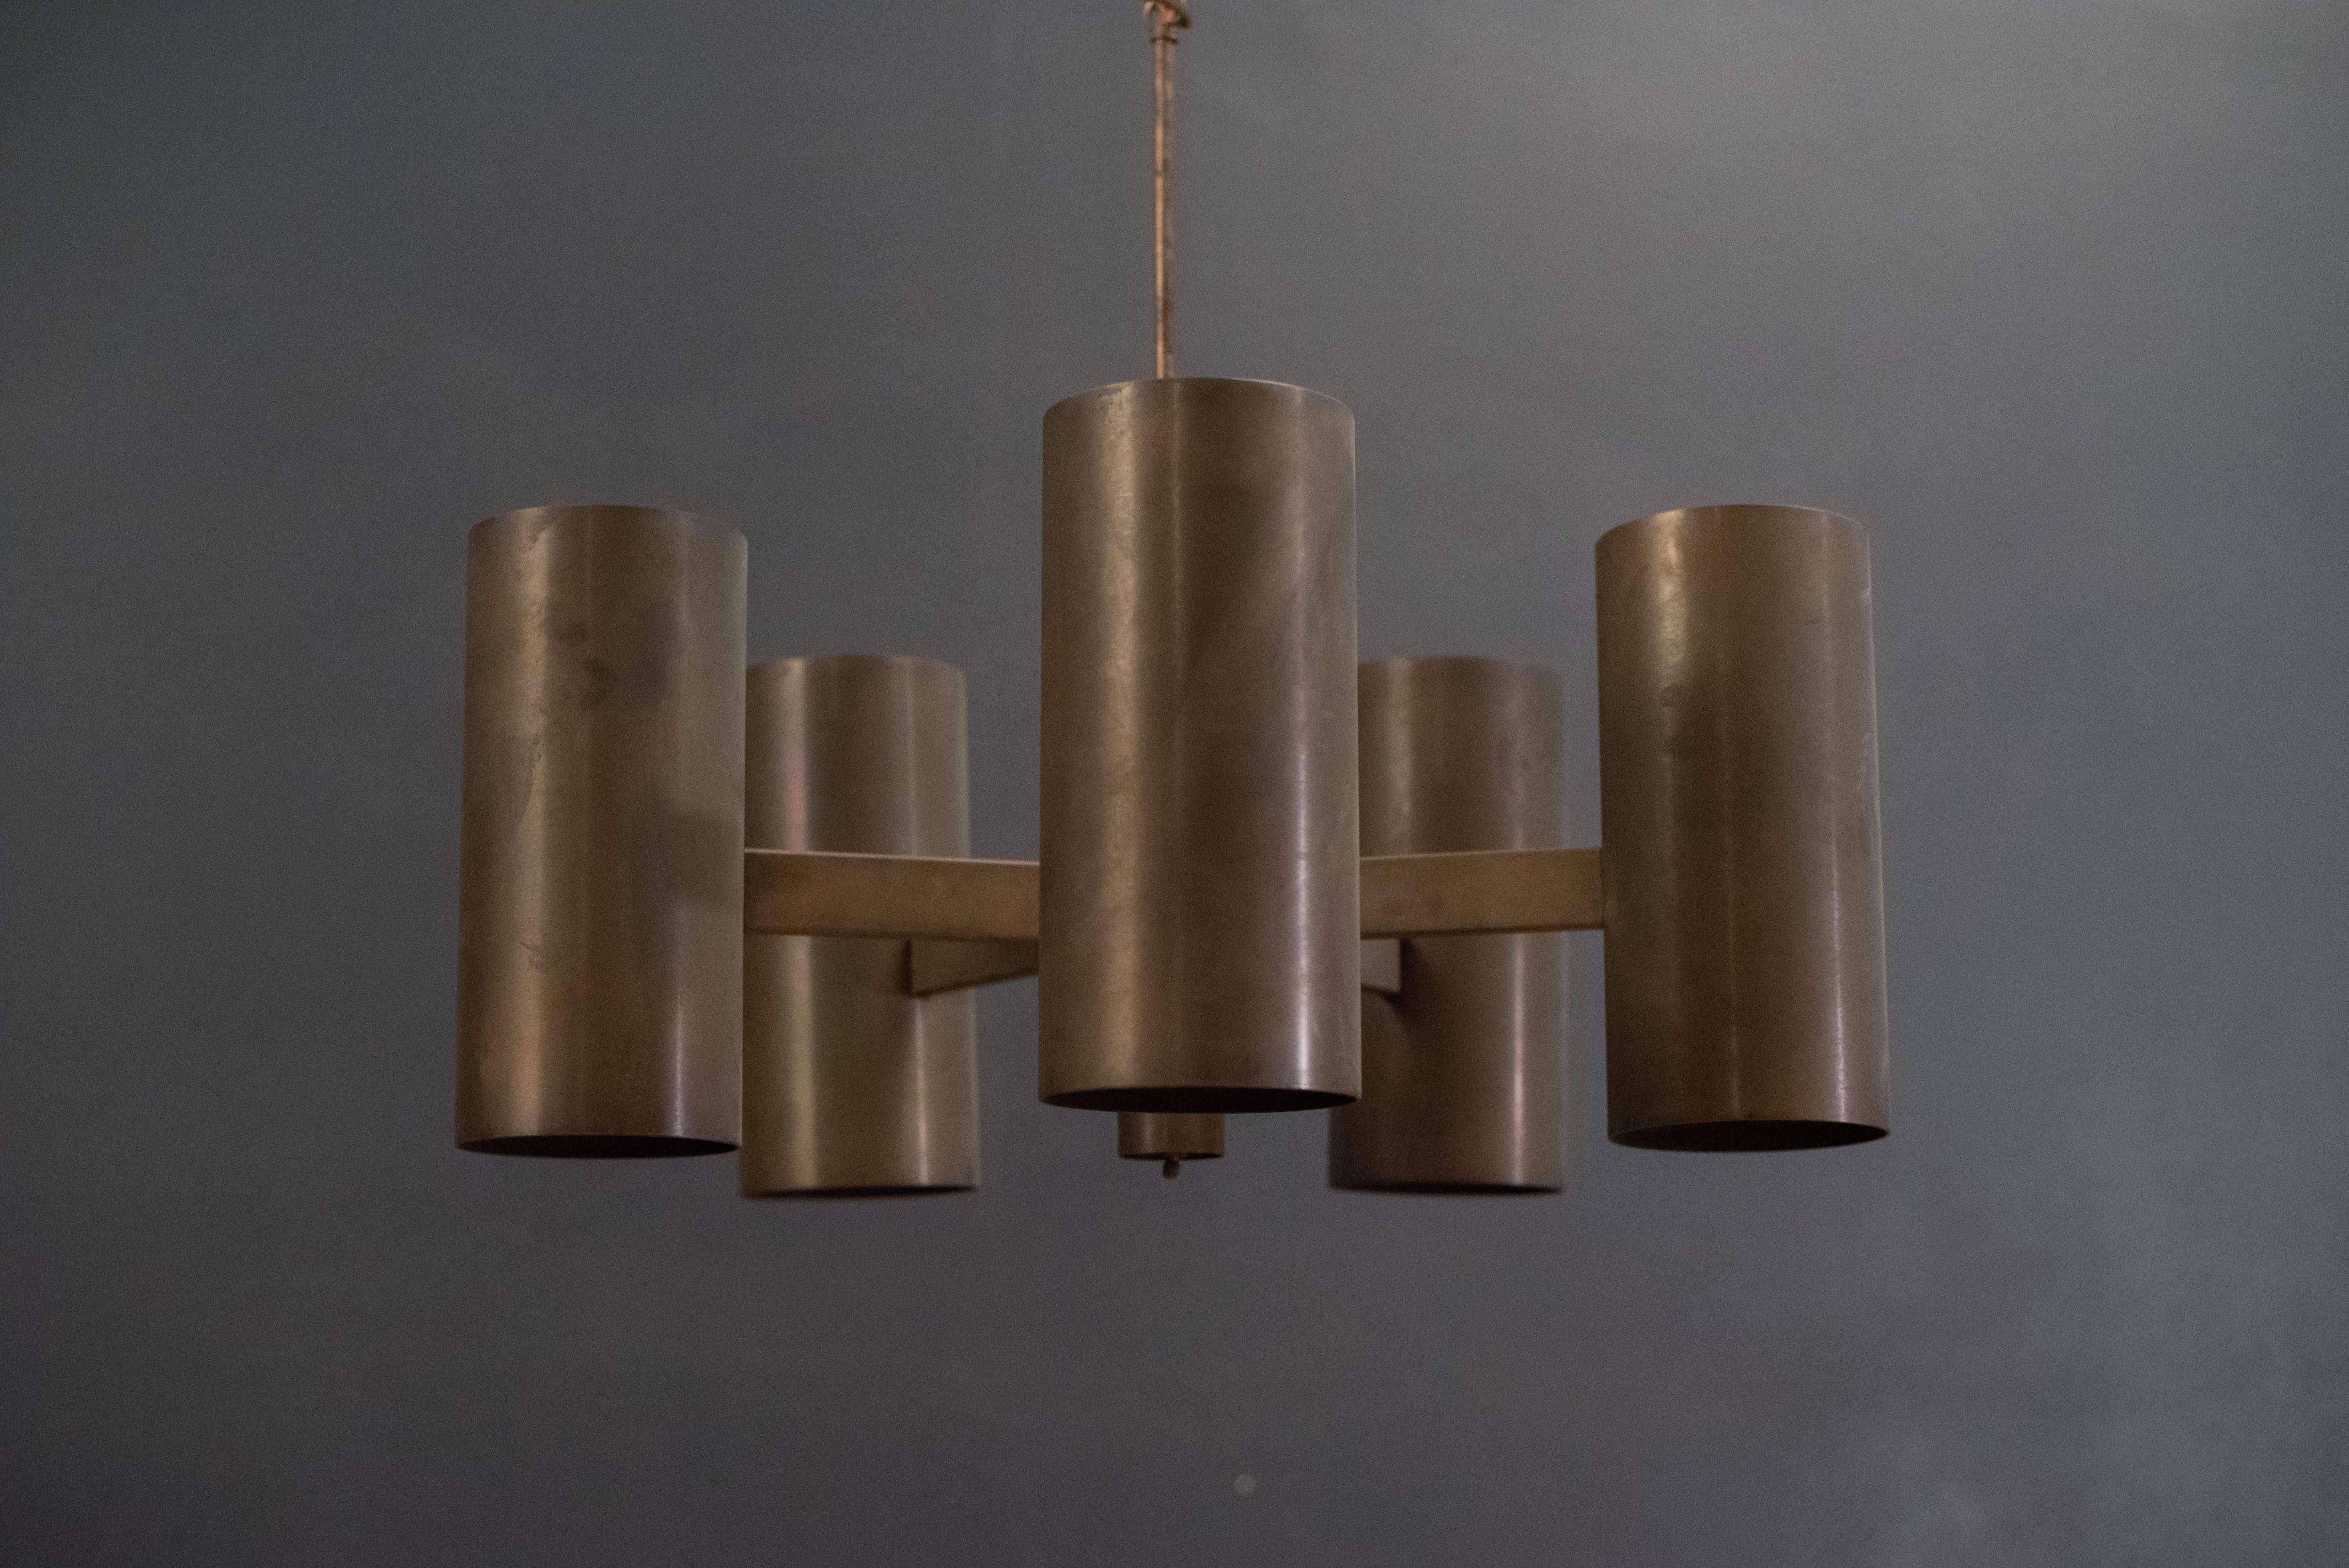 Mid-Century Industrial modern chandelier by Stuart Barnes for Robert Long, circa 1960s of Sausalito, California. This piece features aged bronze patina and includes five cylinders.